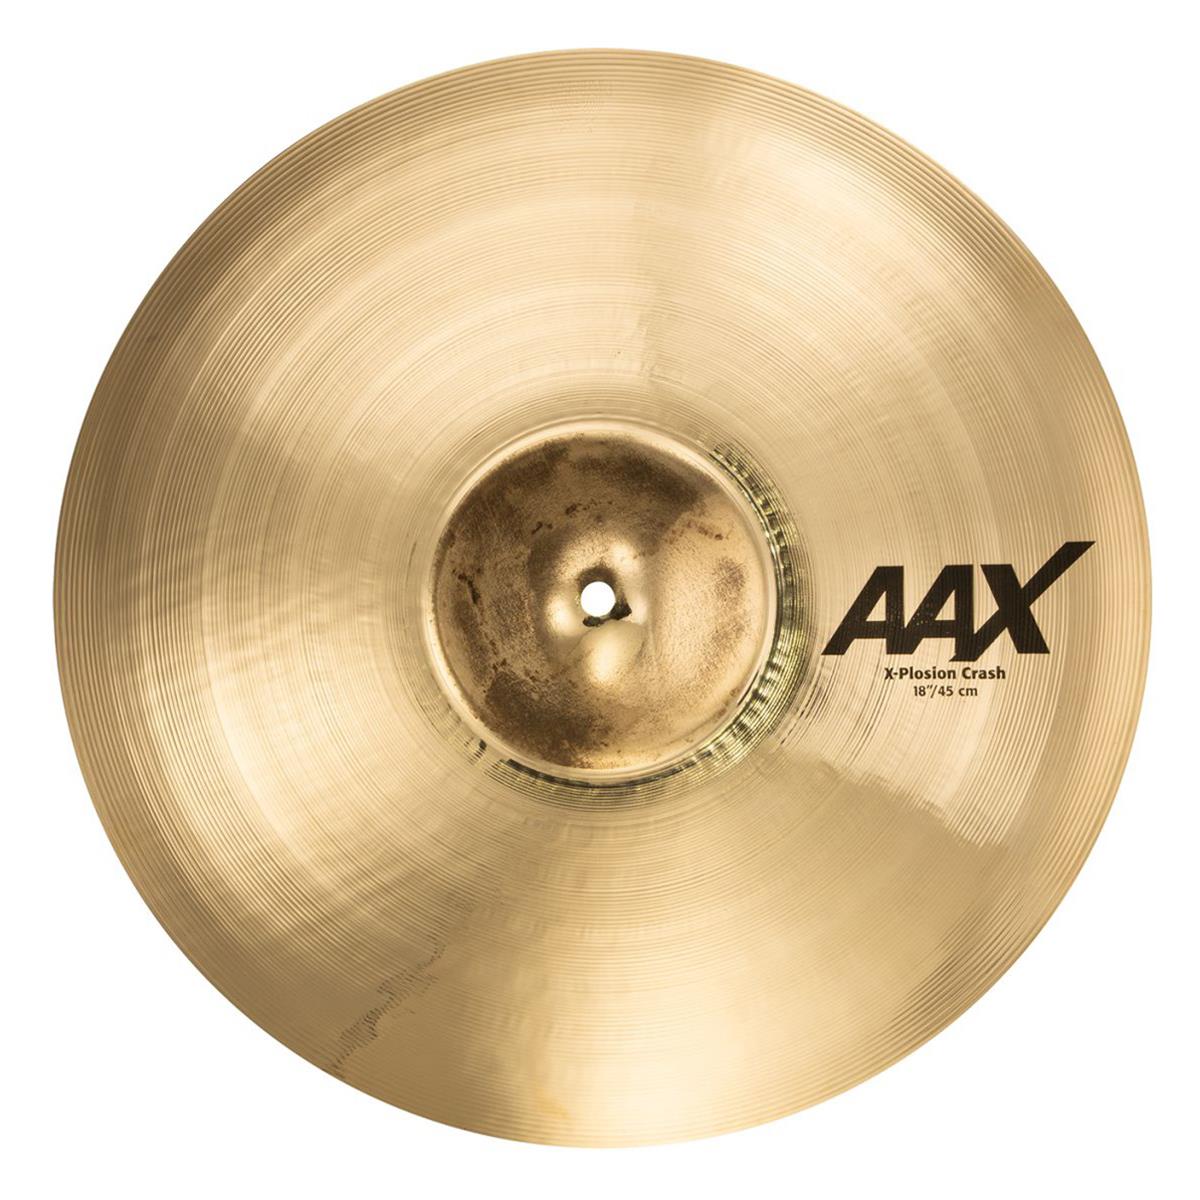 Sabian 18" AAX X-Plosion Crash Cymbal, Medium-Thin, Brilliant Finish, Golden Bursting with energy, the innovative SABIAN 18" AAX X-Plosion Crash explodes with fuller, punchier power. The SABIAN AAX series delivers consistently bright, crisp, clear and cutting responses - AAX is the ultimate Modern Bright sound!